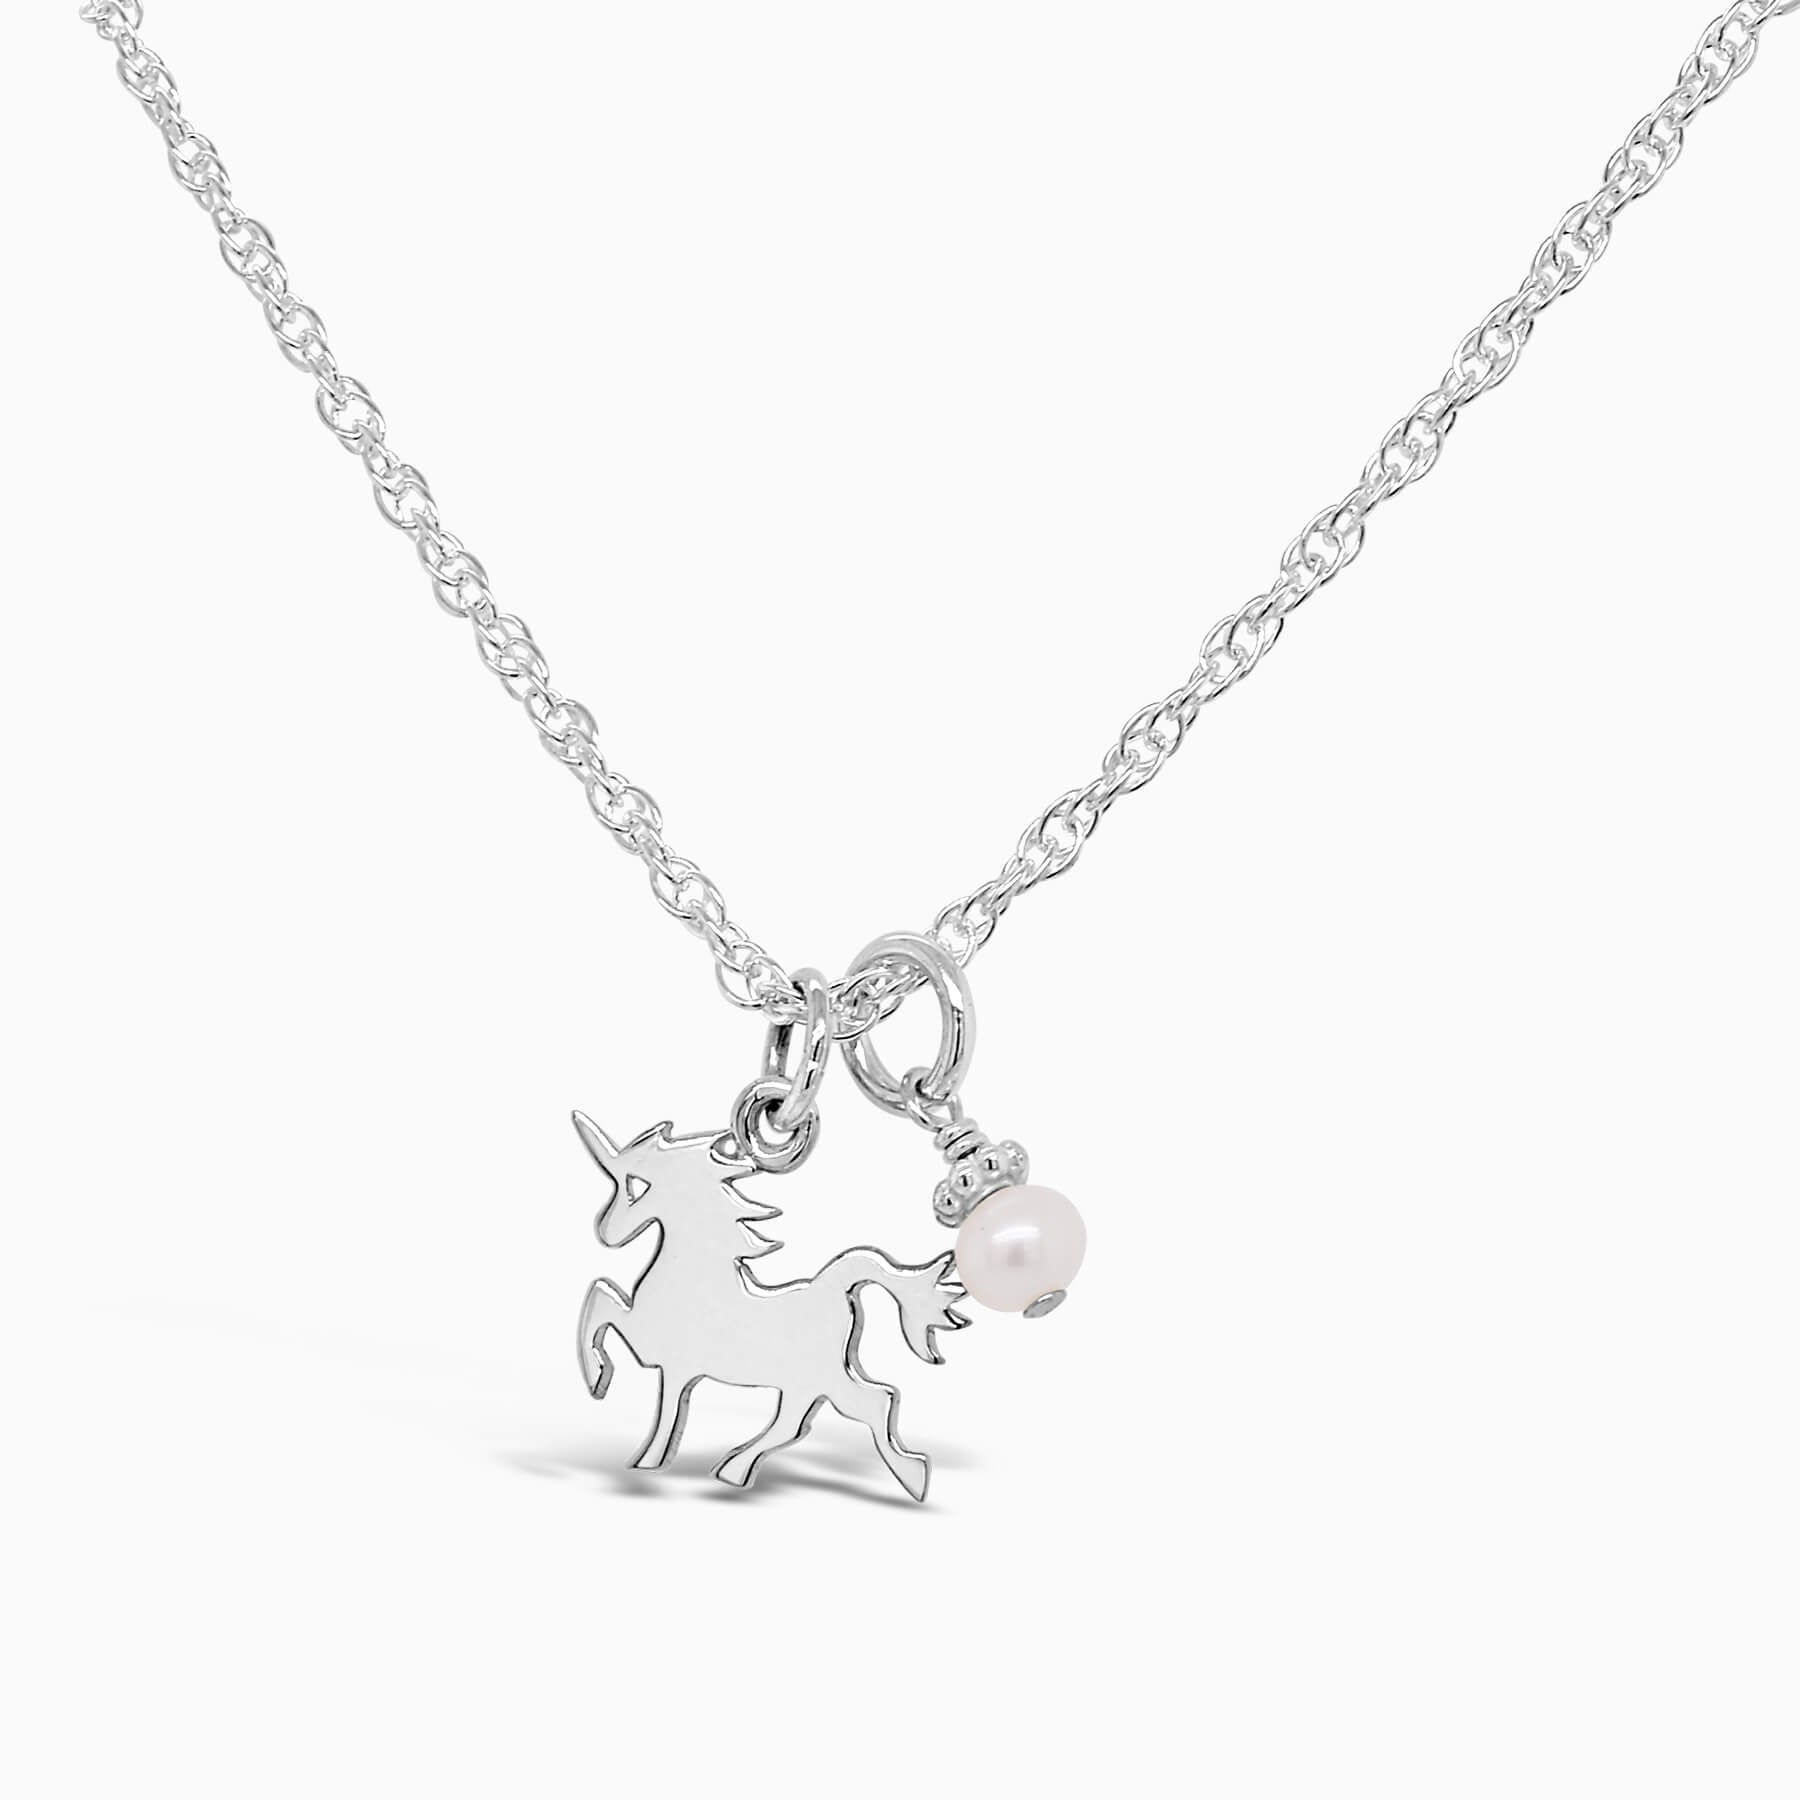 Lovely Cute Unicorn Pendant Necklace Little Girl's Jewelry Gift